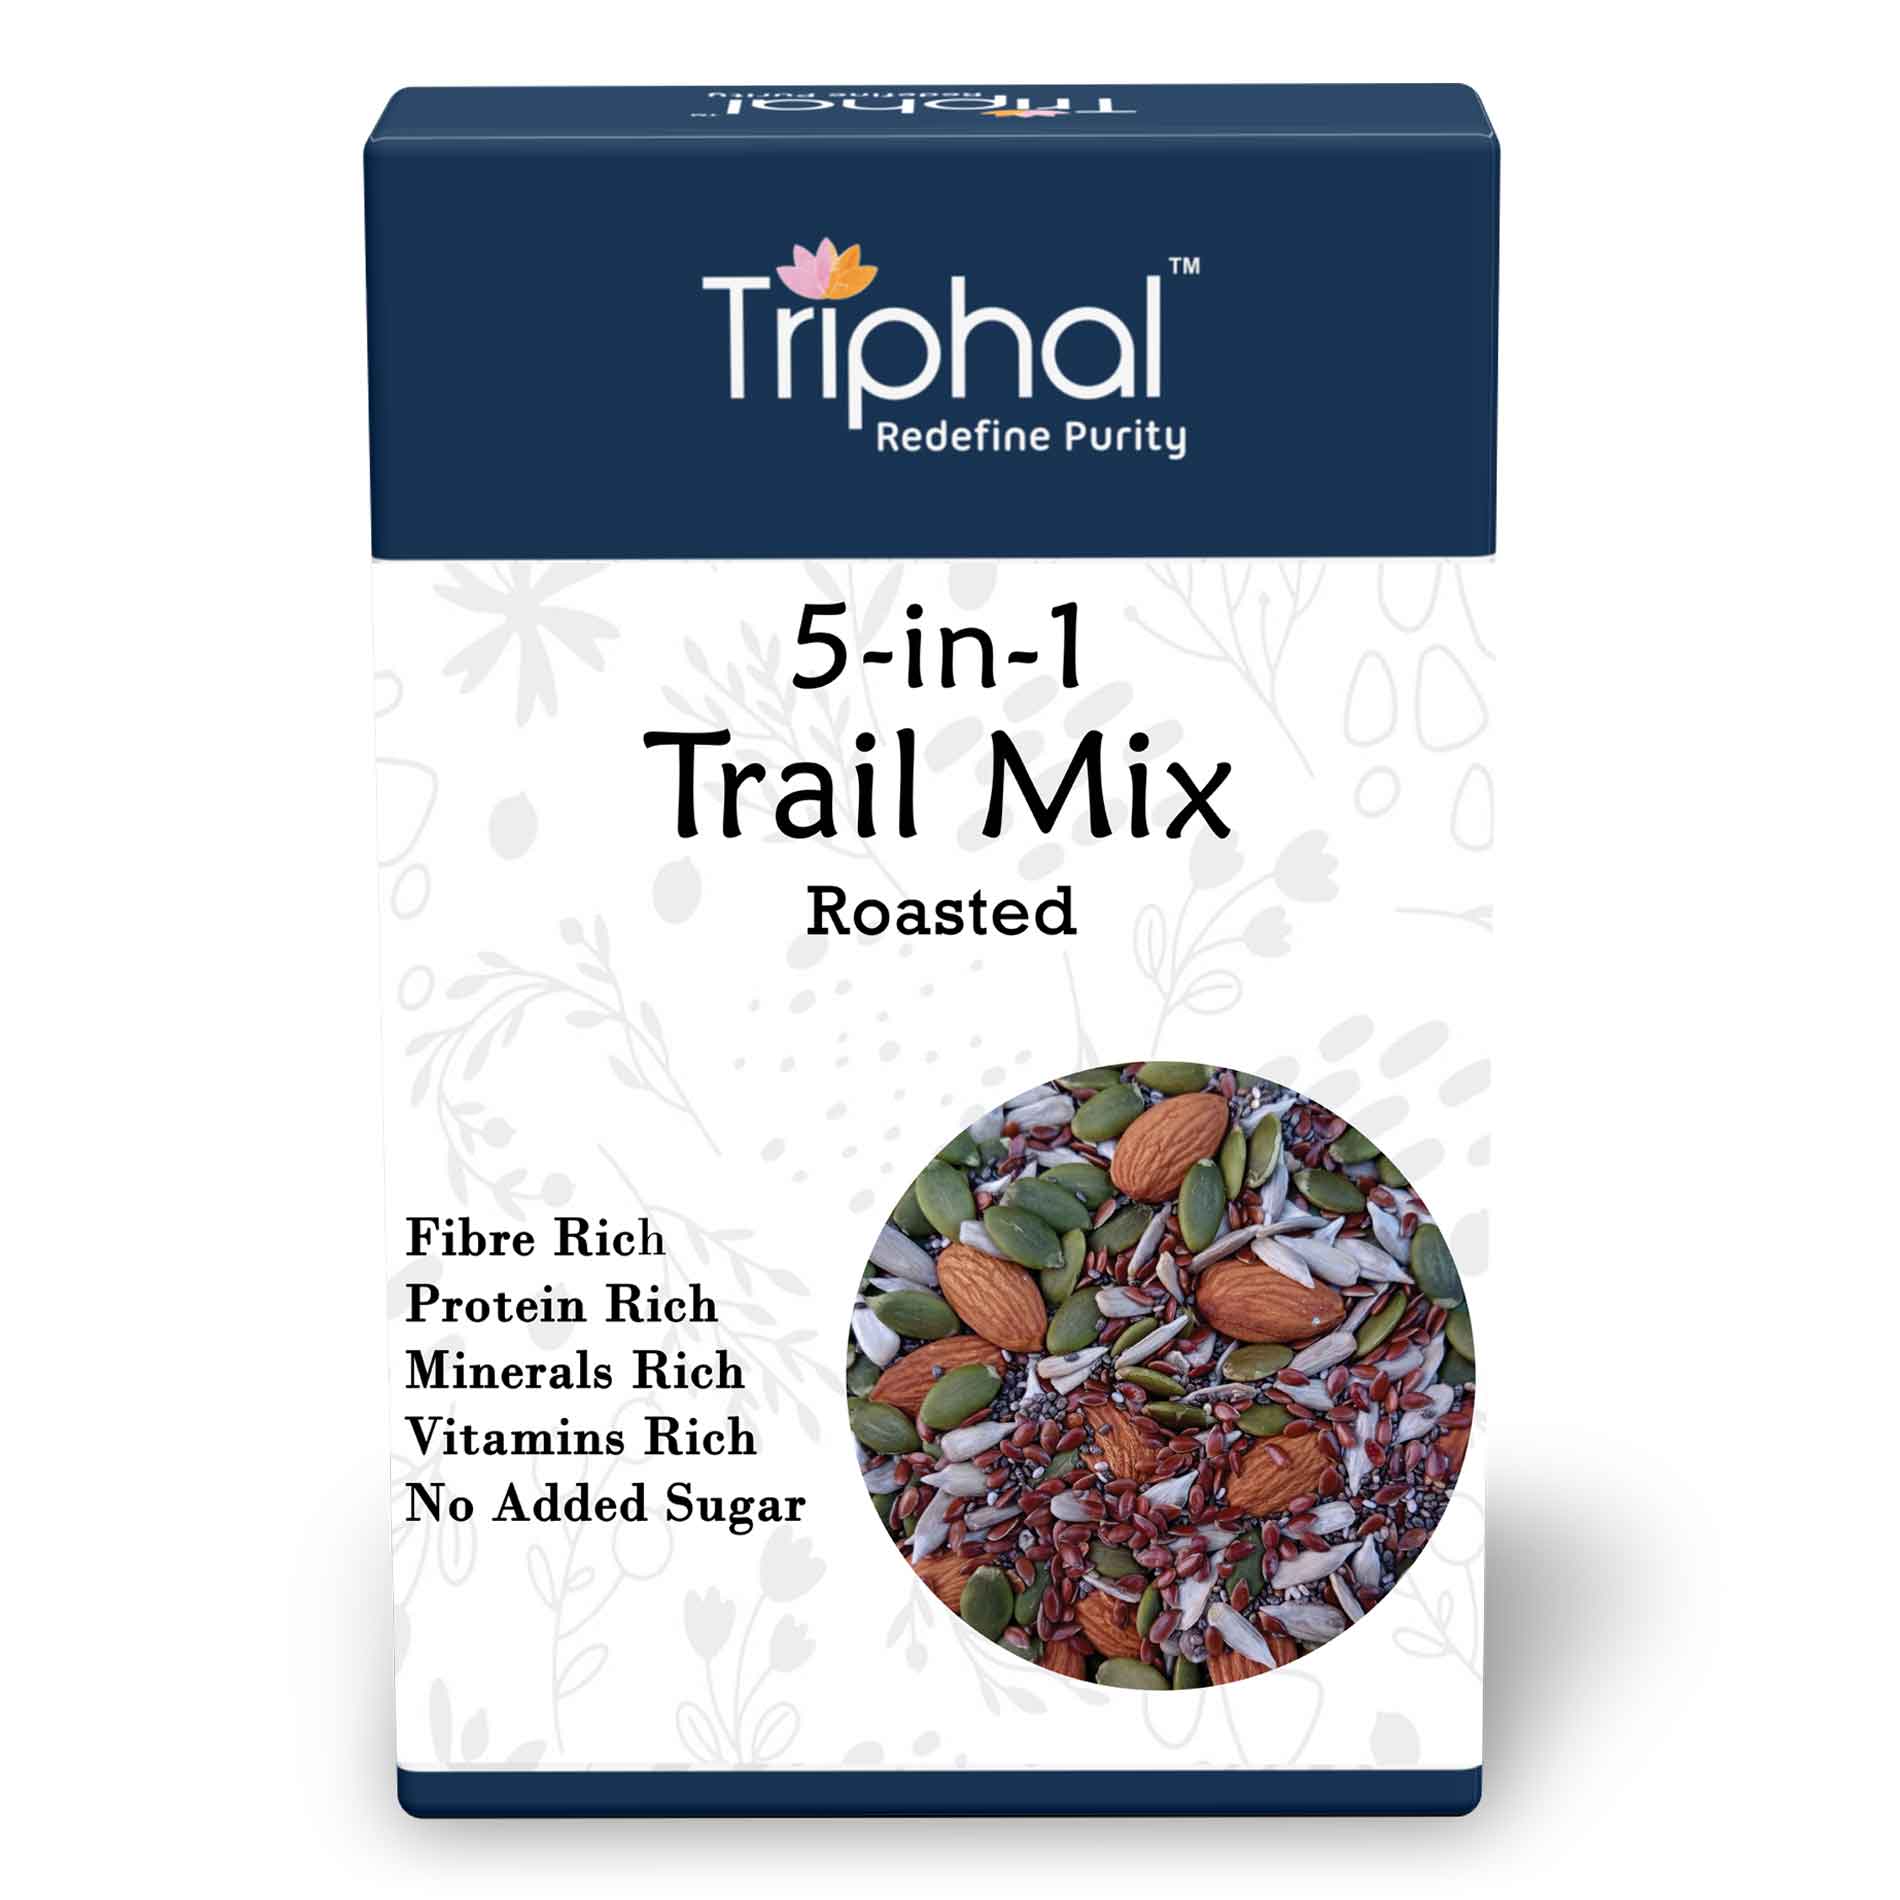 5 in 1 Trail Mix - A unique mixture of edible seeds